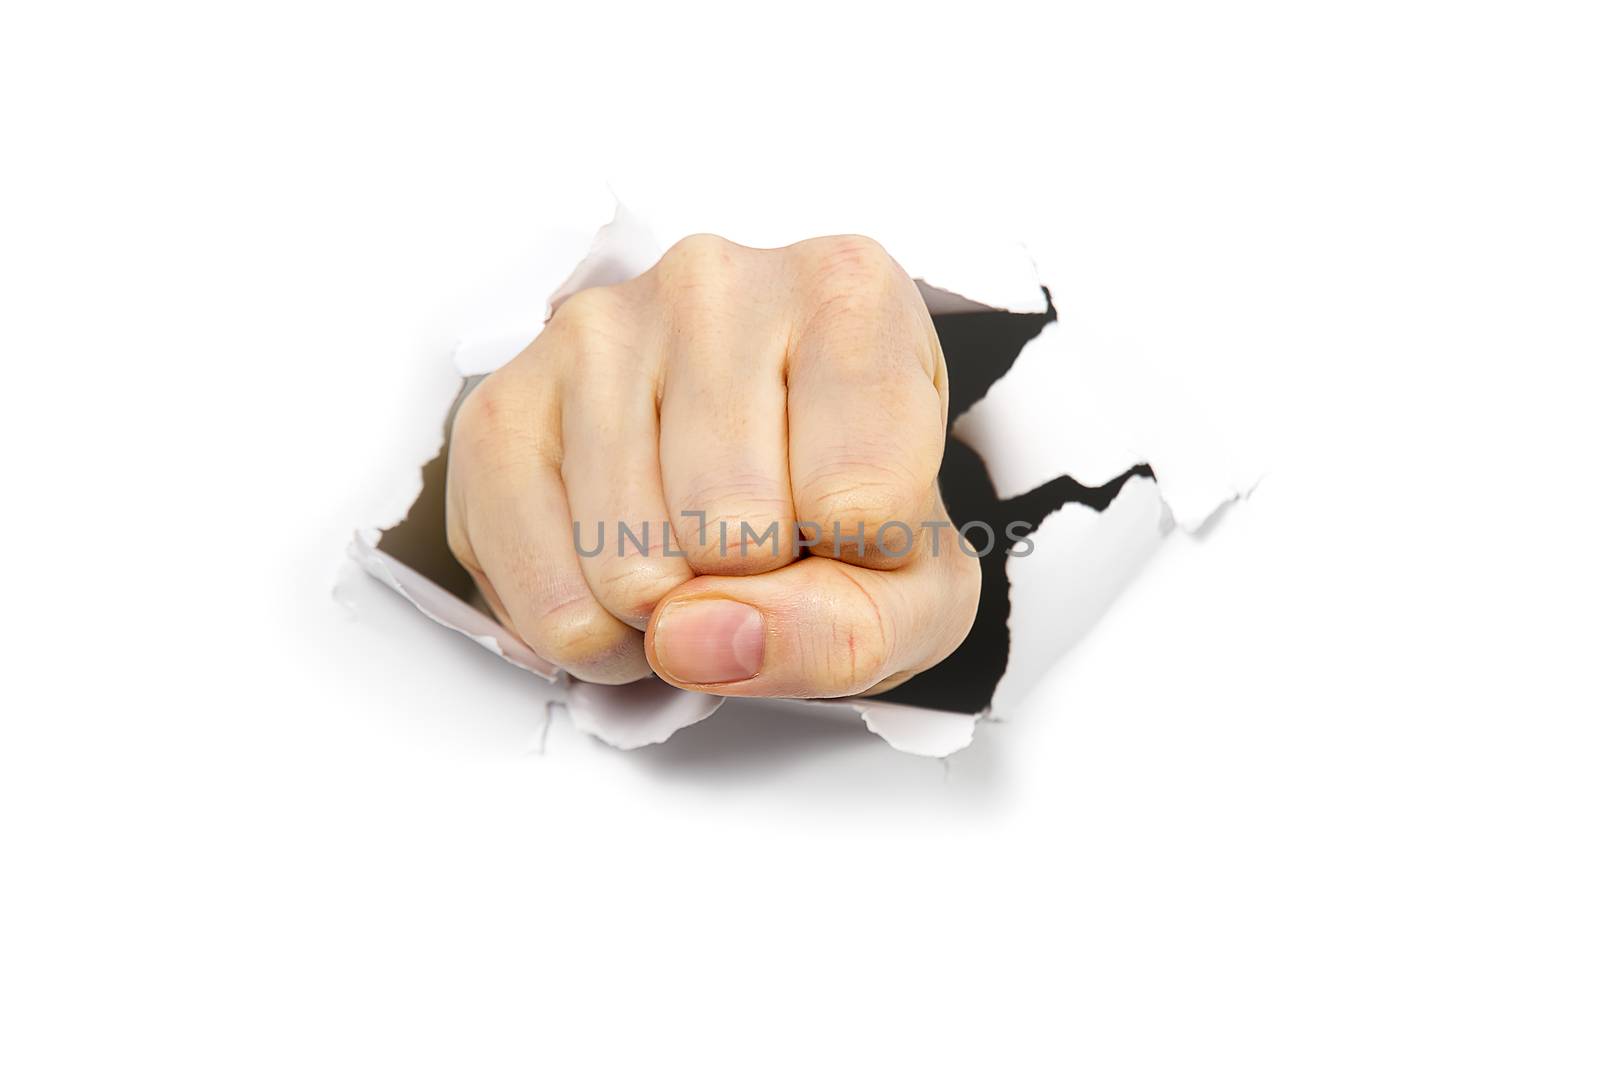 punching hole through paper wall with fist. Punch break through the paper wall. Fist coming out the paper hole isolated on white background by PhotoTime